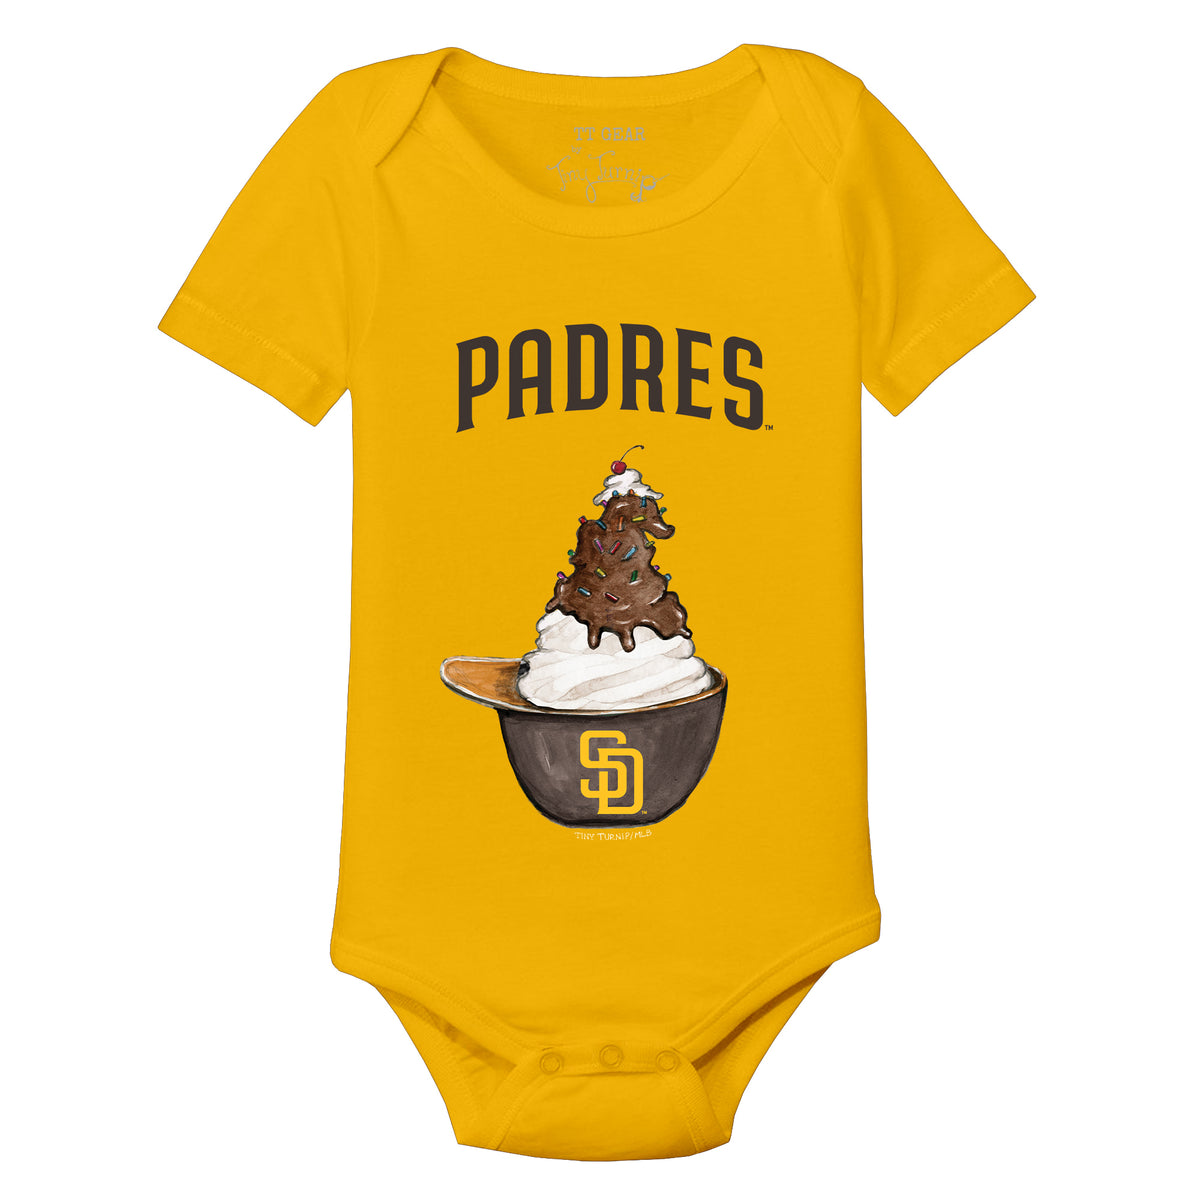 San Francisco Giants Baseball Time Sign Onesie by Tap On Photo